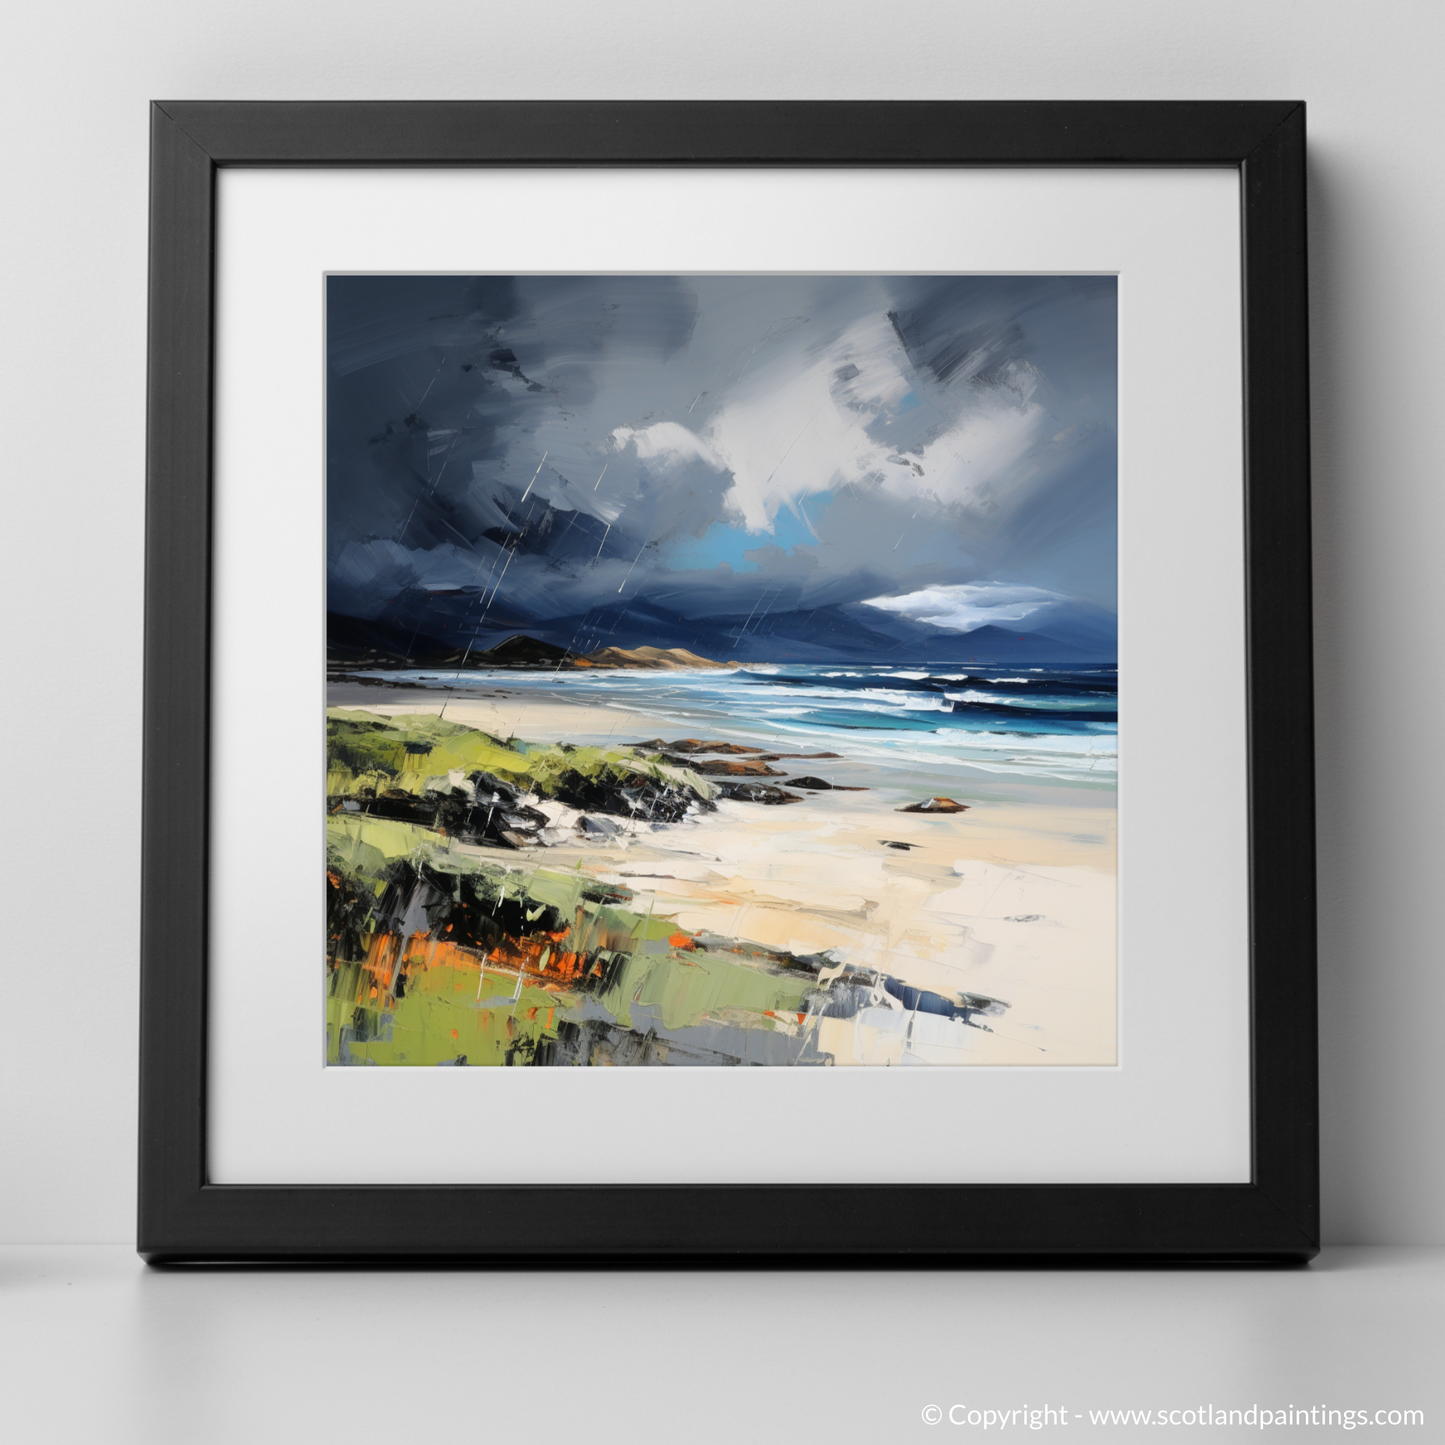 Painting and Art Print of Scarista Beach with a stormy sky. Storm's Embrace at Scarista Beach: An Expressionist Homage.